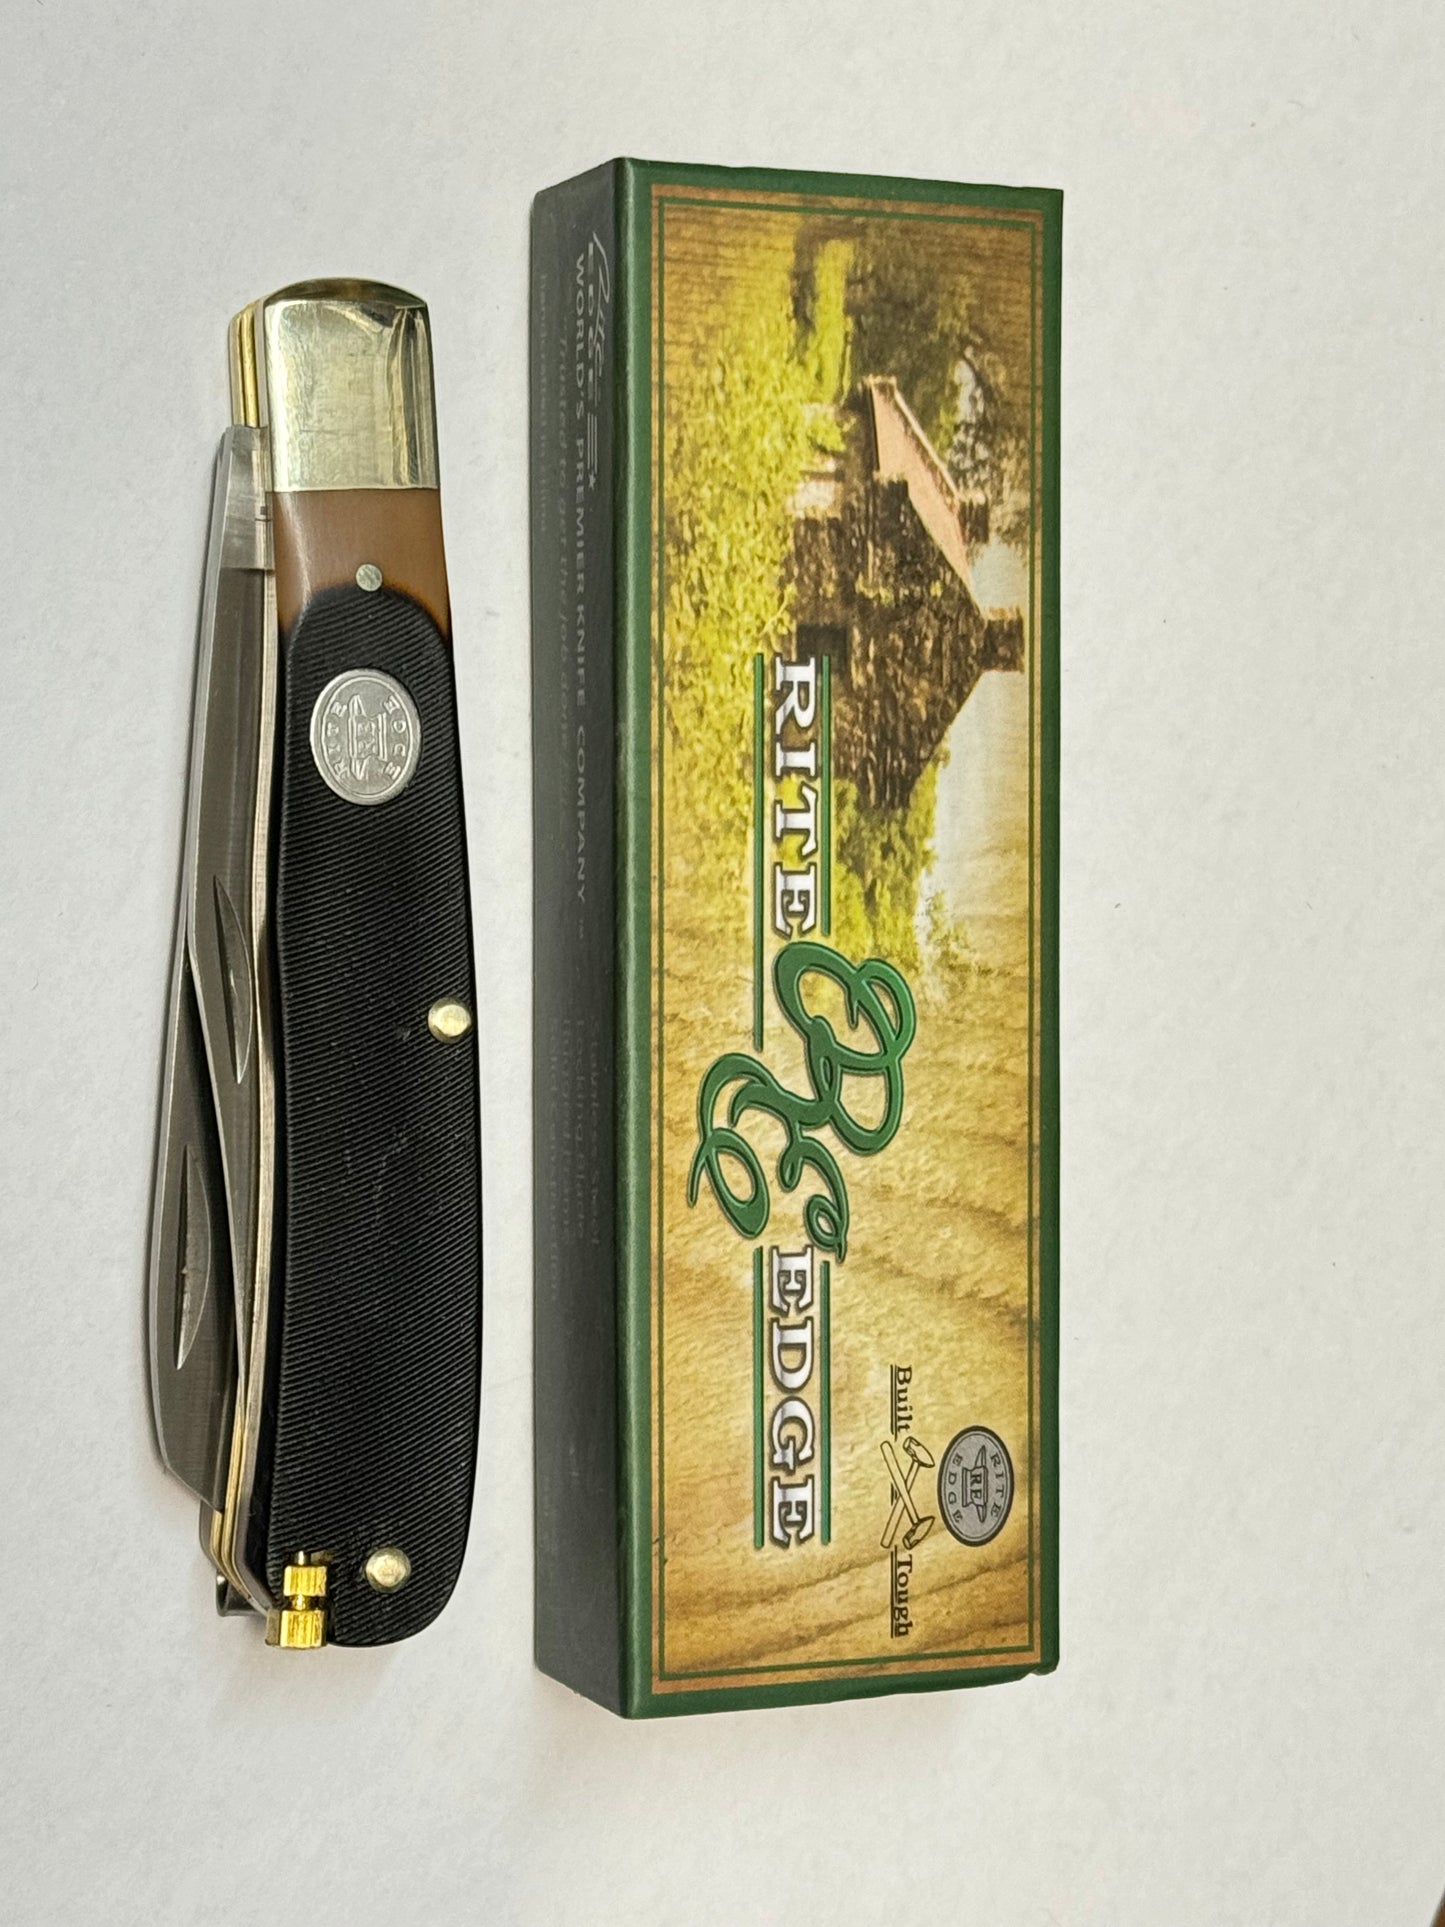 Rite Edge Stockman 2 Blade Folding Knife with Pick and Tweezers